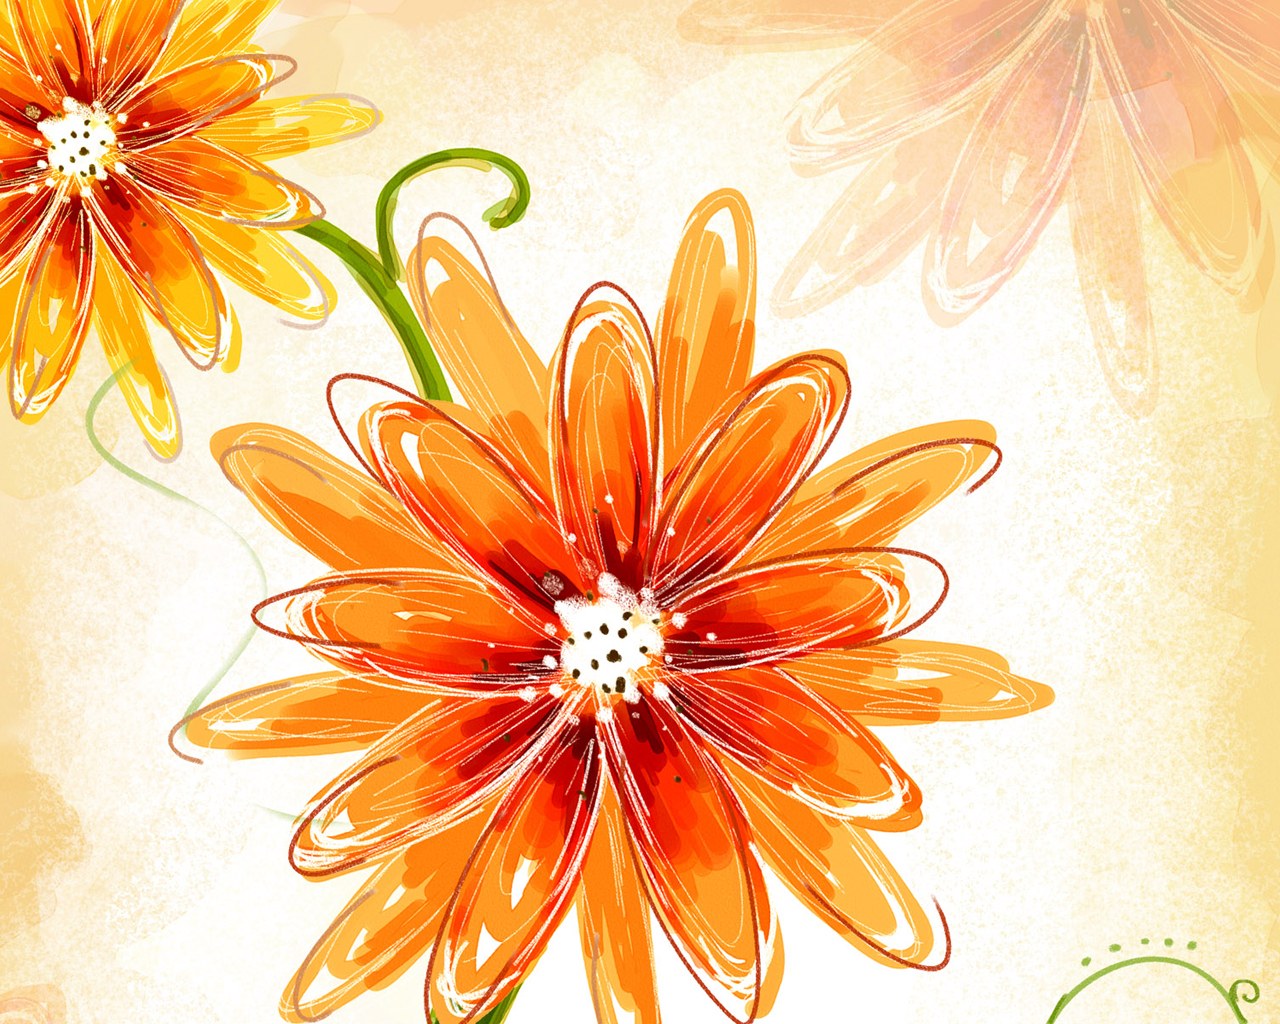 🔥 Download Flower Design by @maryc98 | Flower Design Wallpapers, Cool